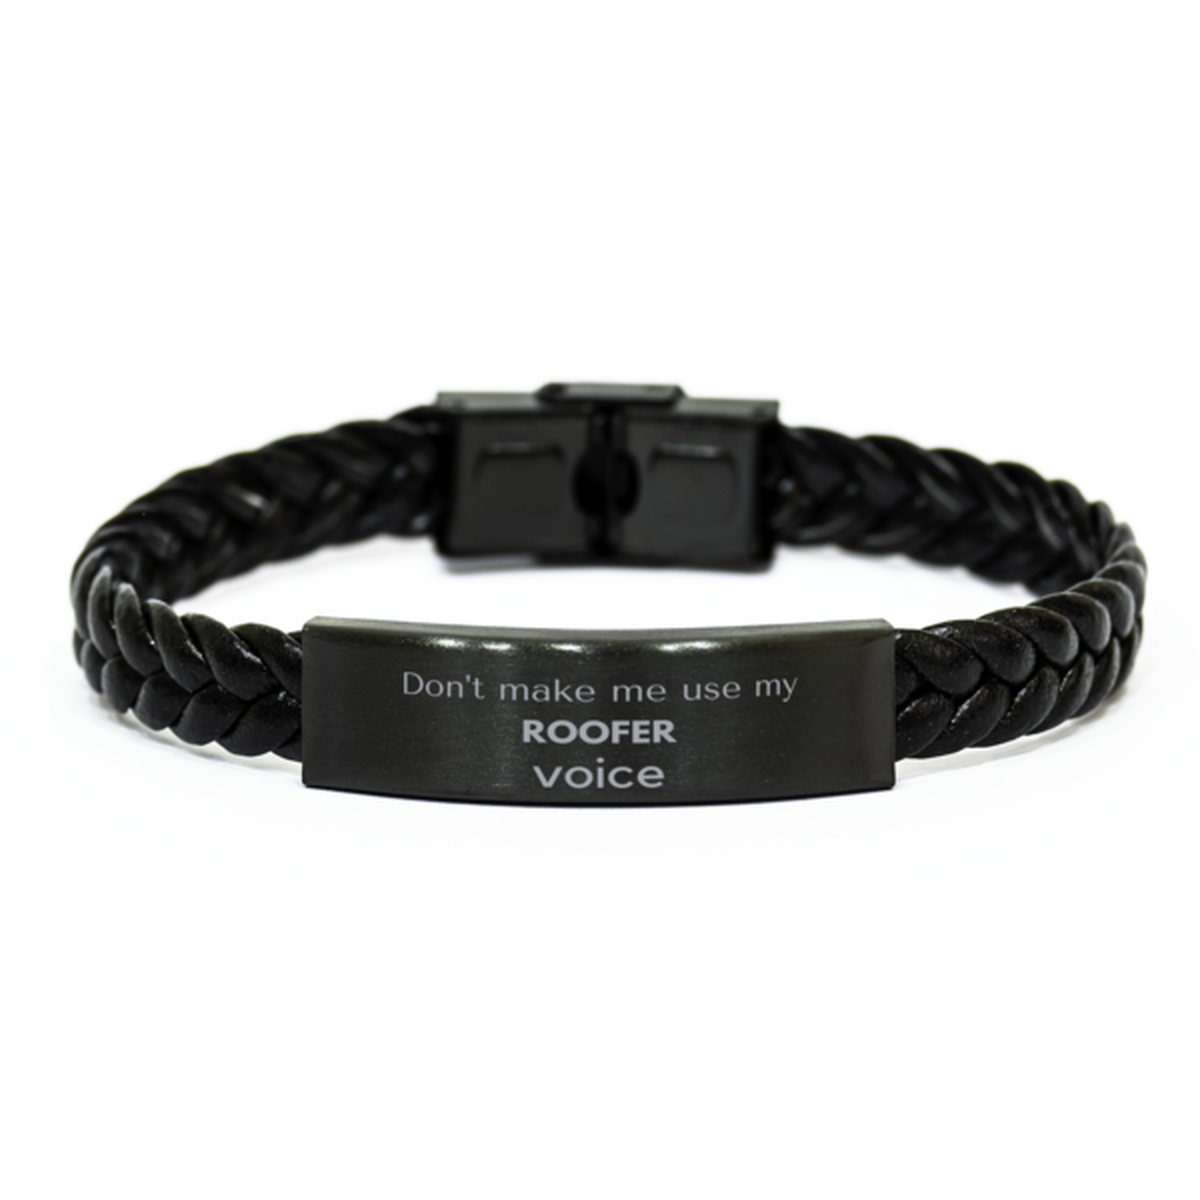 Don't make me use my Roofer voice, Sarcasm Roofer Gifts, Christmas Roofer Braided Leather Bracelet Birthday Unique Gifts For Roofer Coworkers, Men, Women, Colleague, Friends